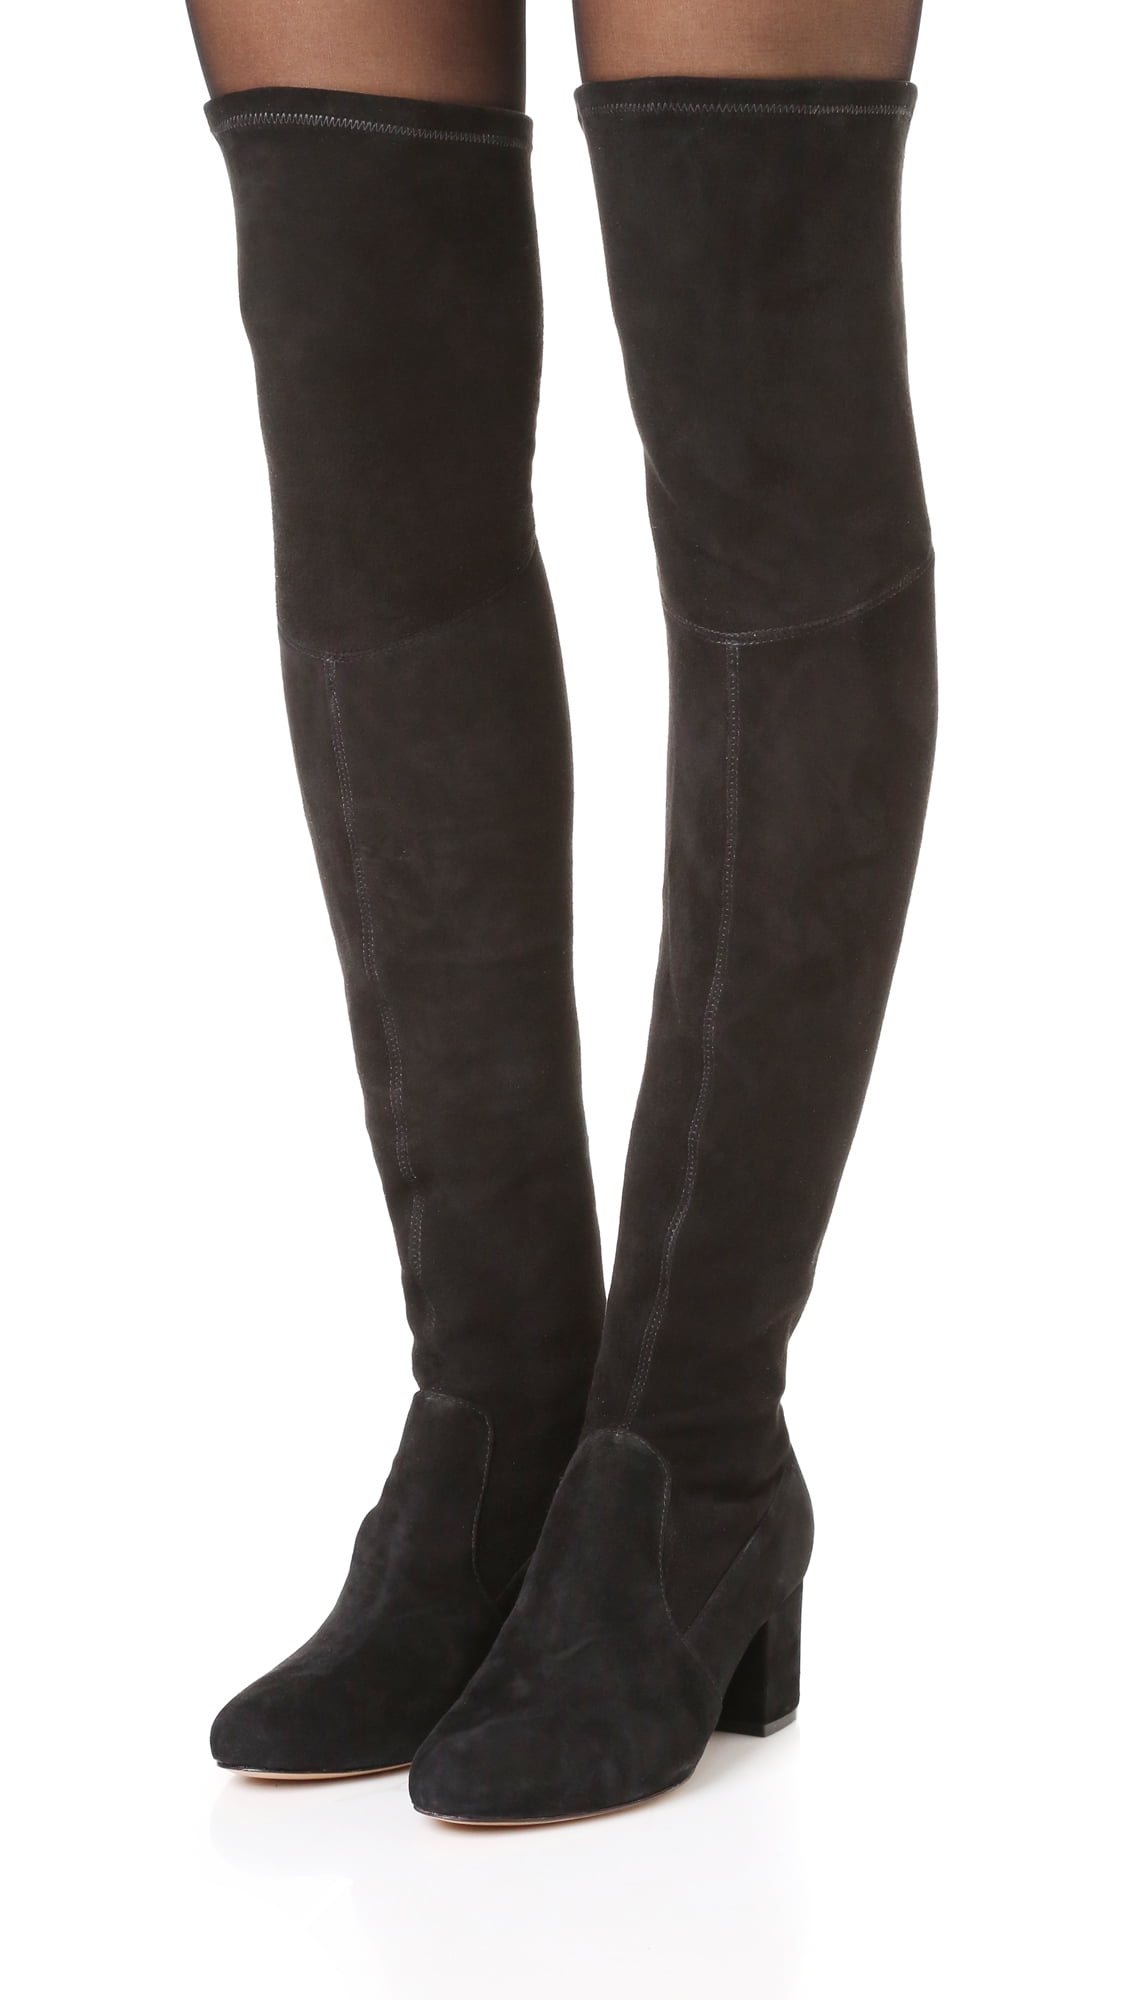 BLACK STRETCH LONG BOOTS LADIES GREY OVER THE KNEE BOOTS BLOCK HEEL SHOE BOOT